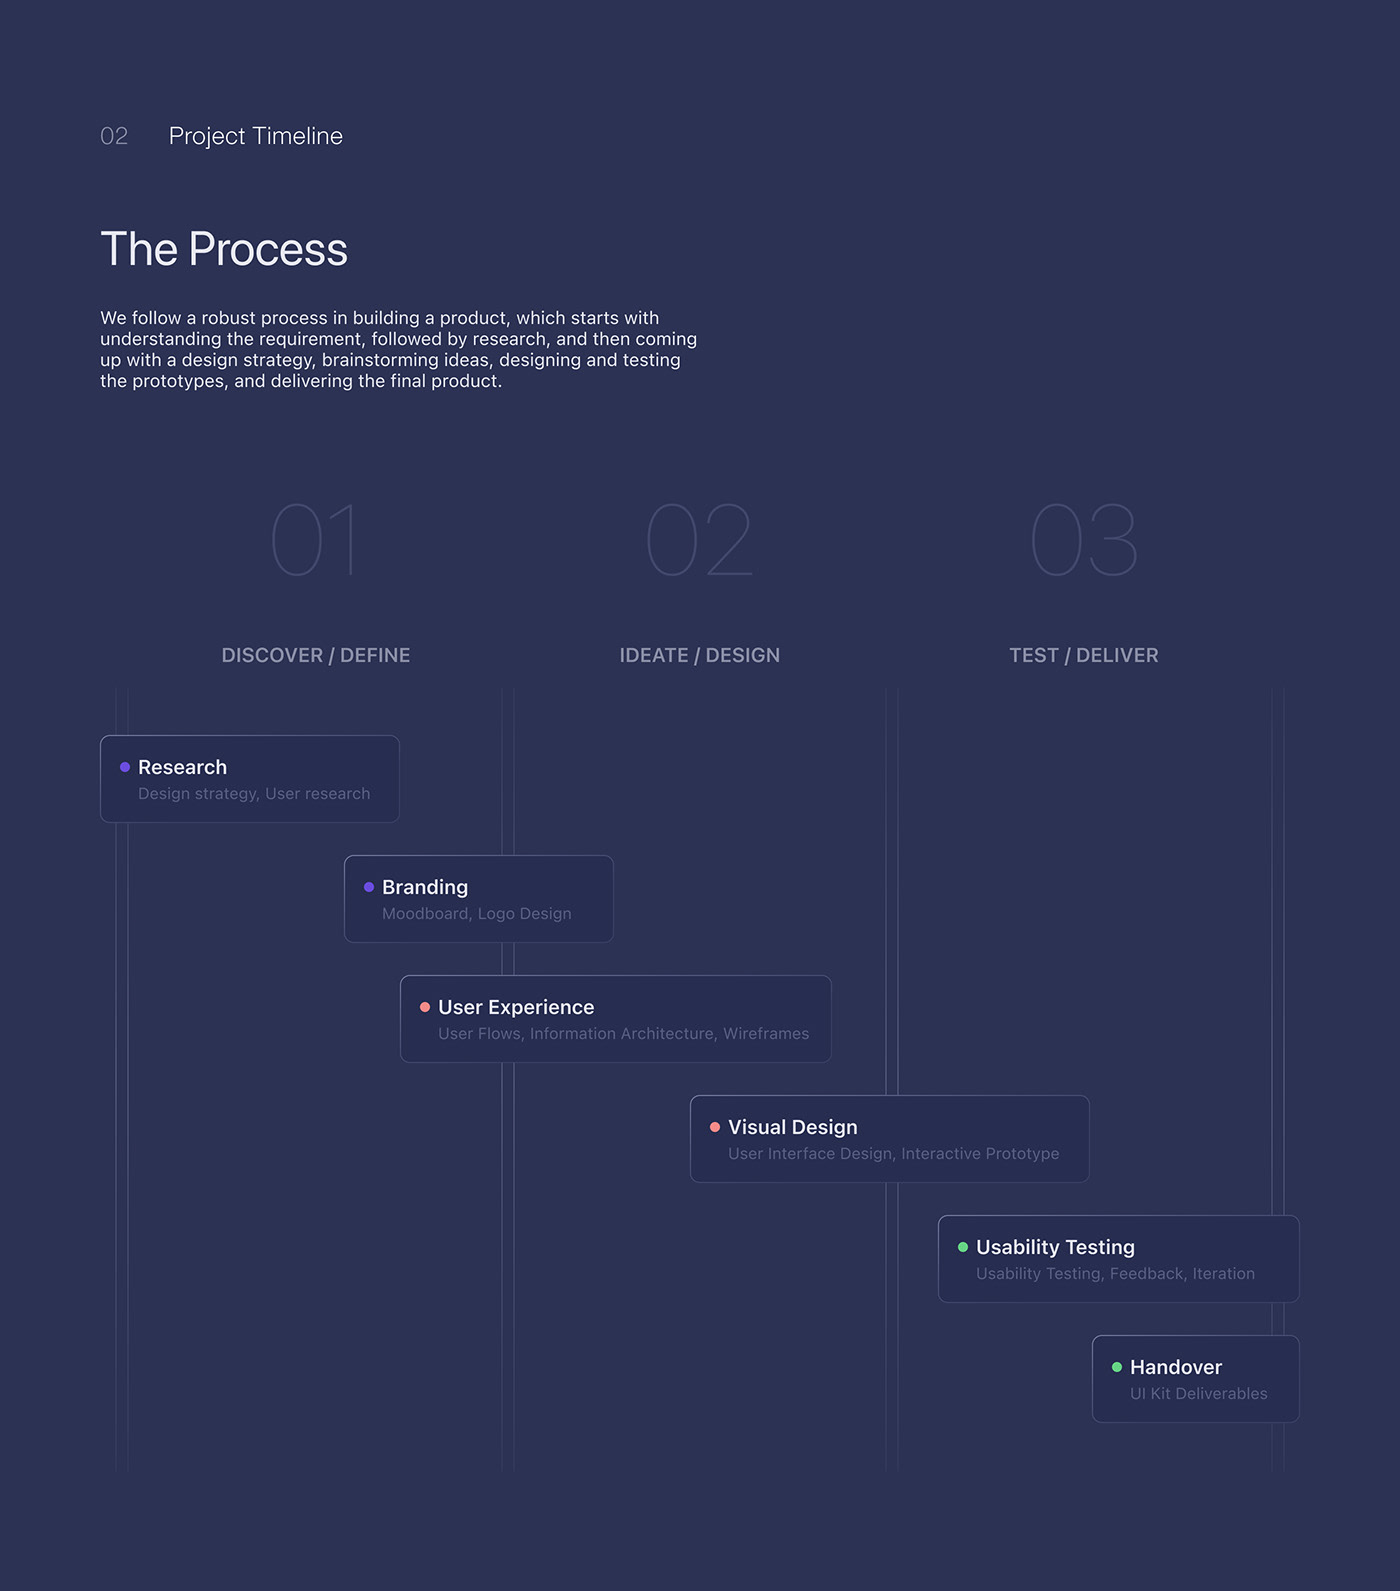 Fitness and Wellness mobile app - process timeline